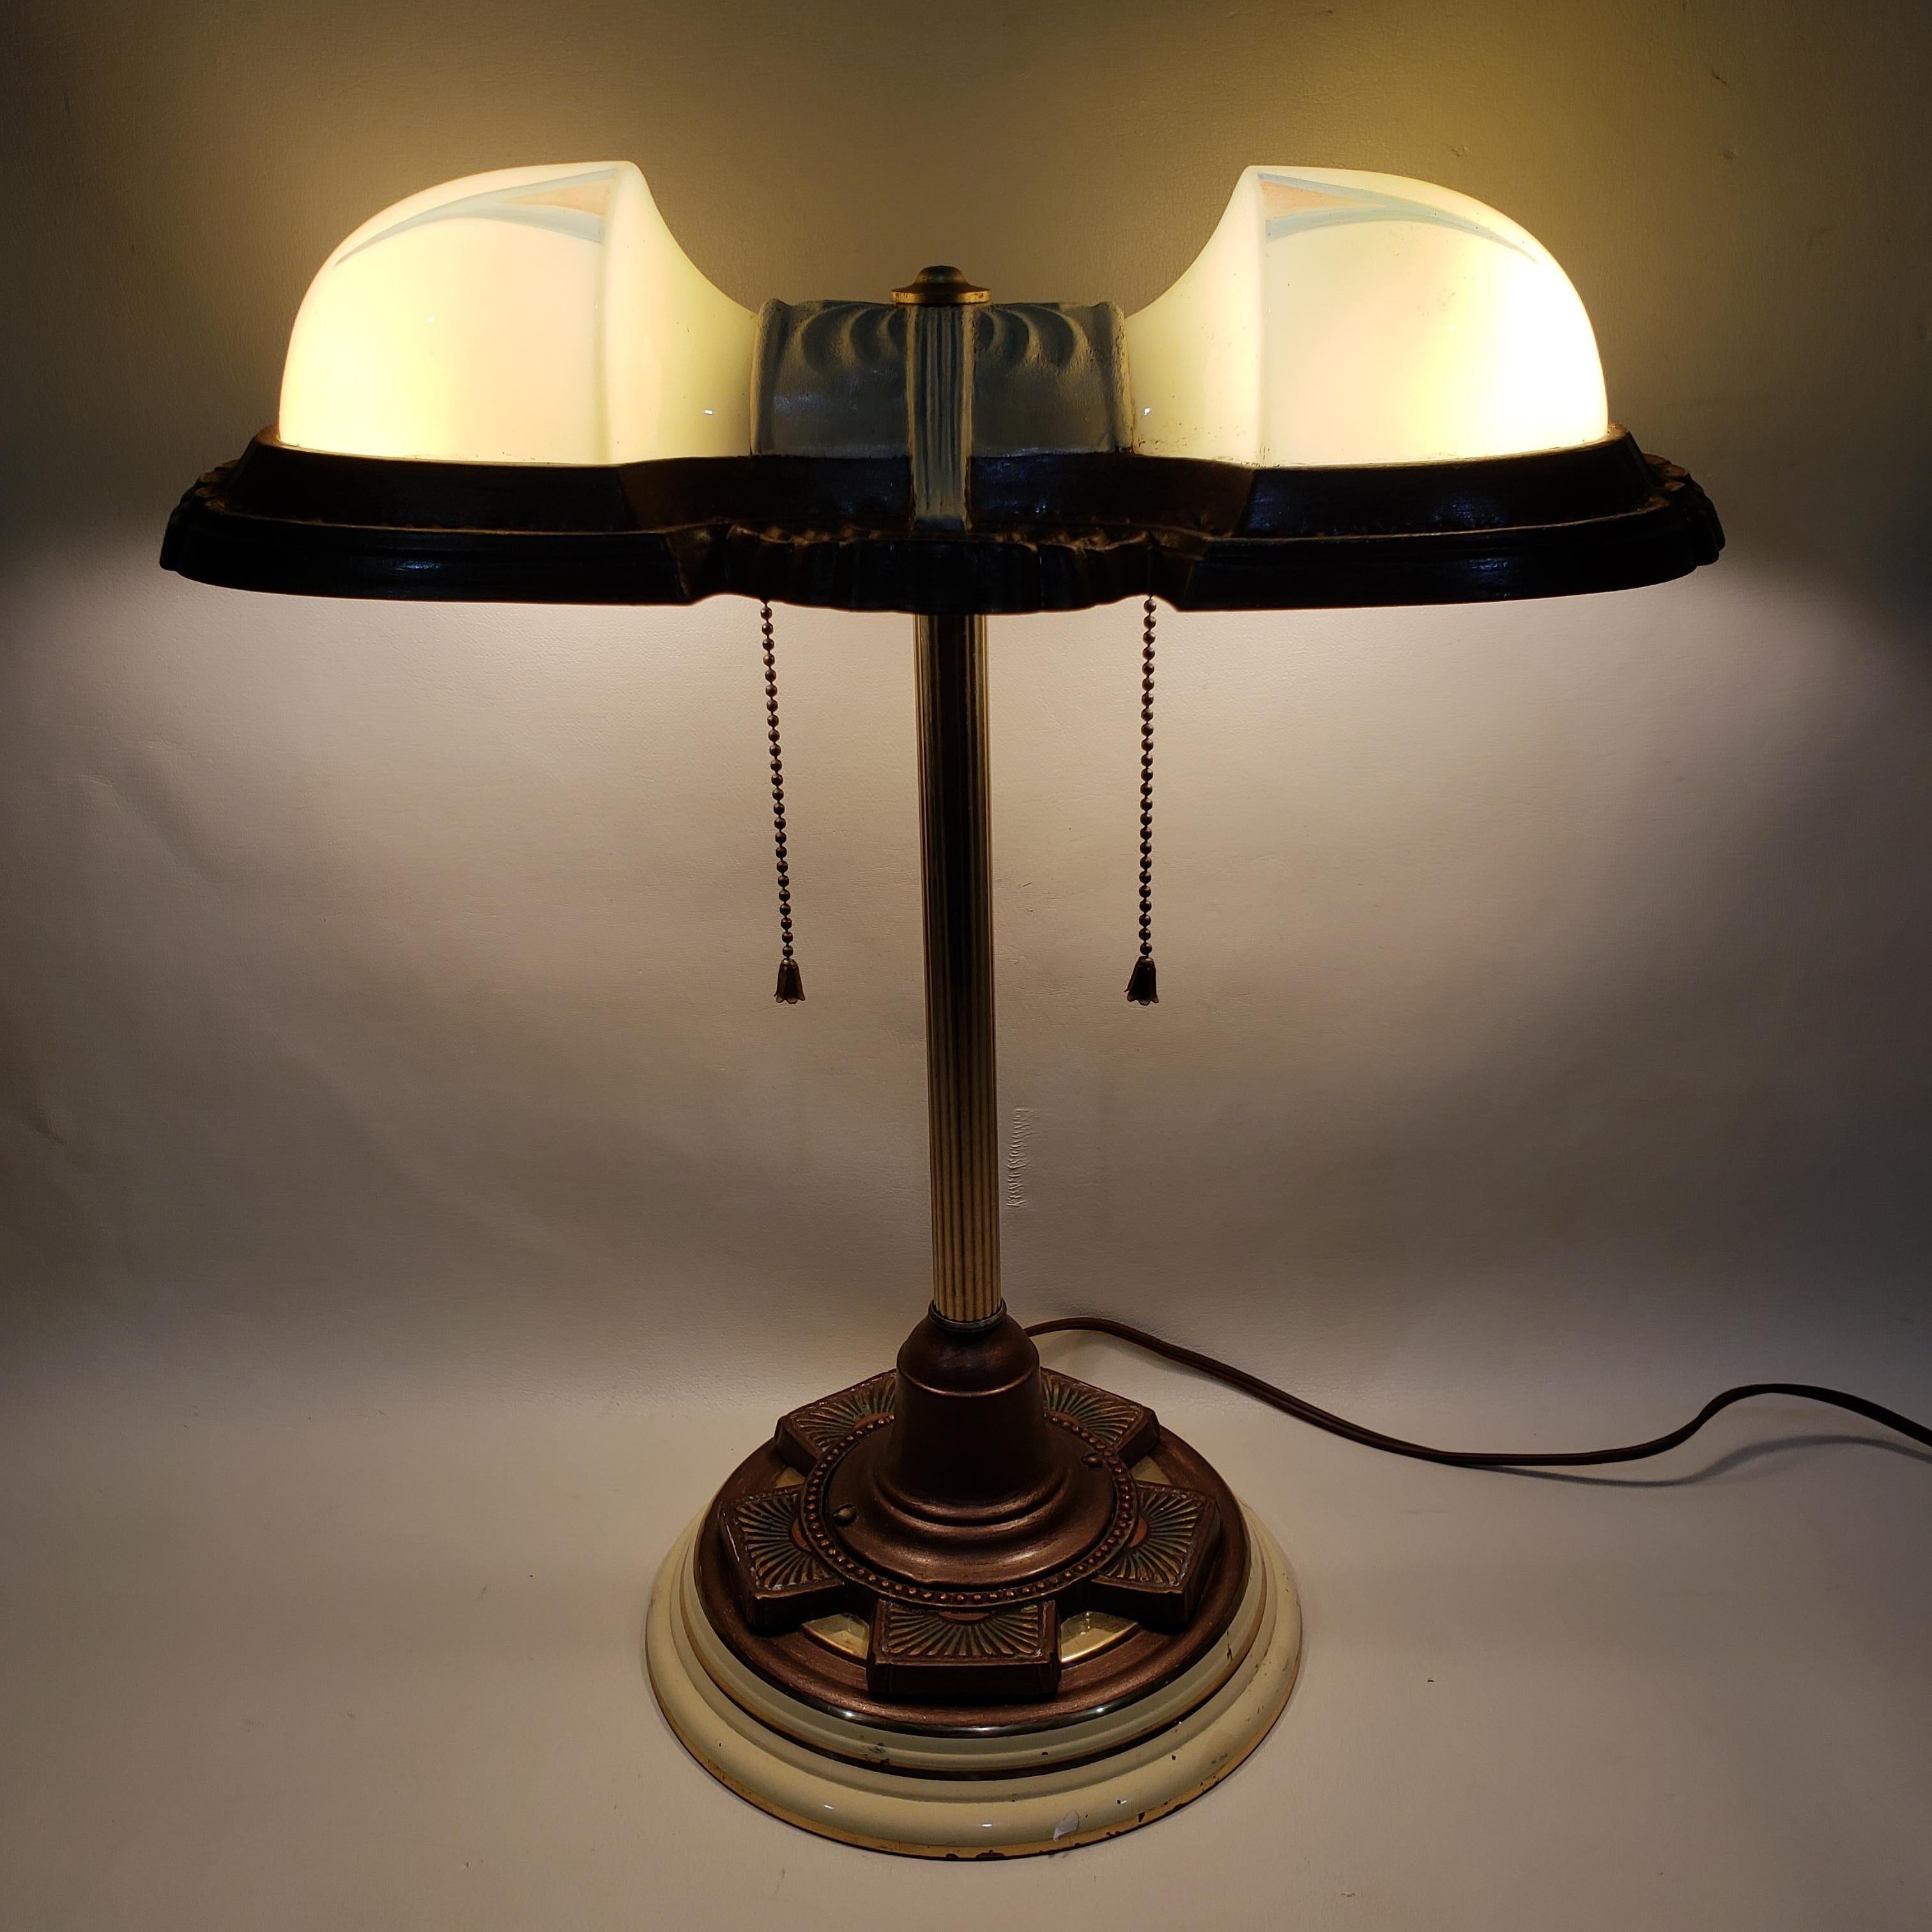 Two light Art Deco table lamp with light mint green shades and a decorative metal base.